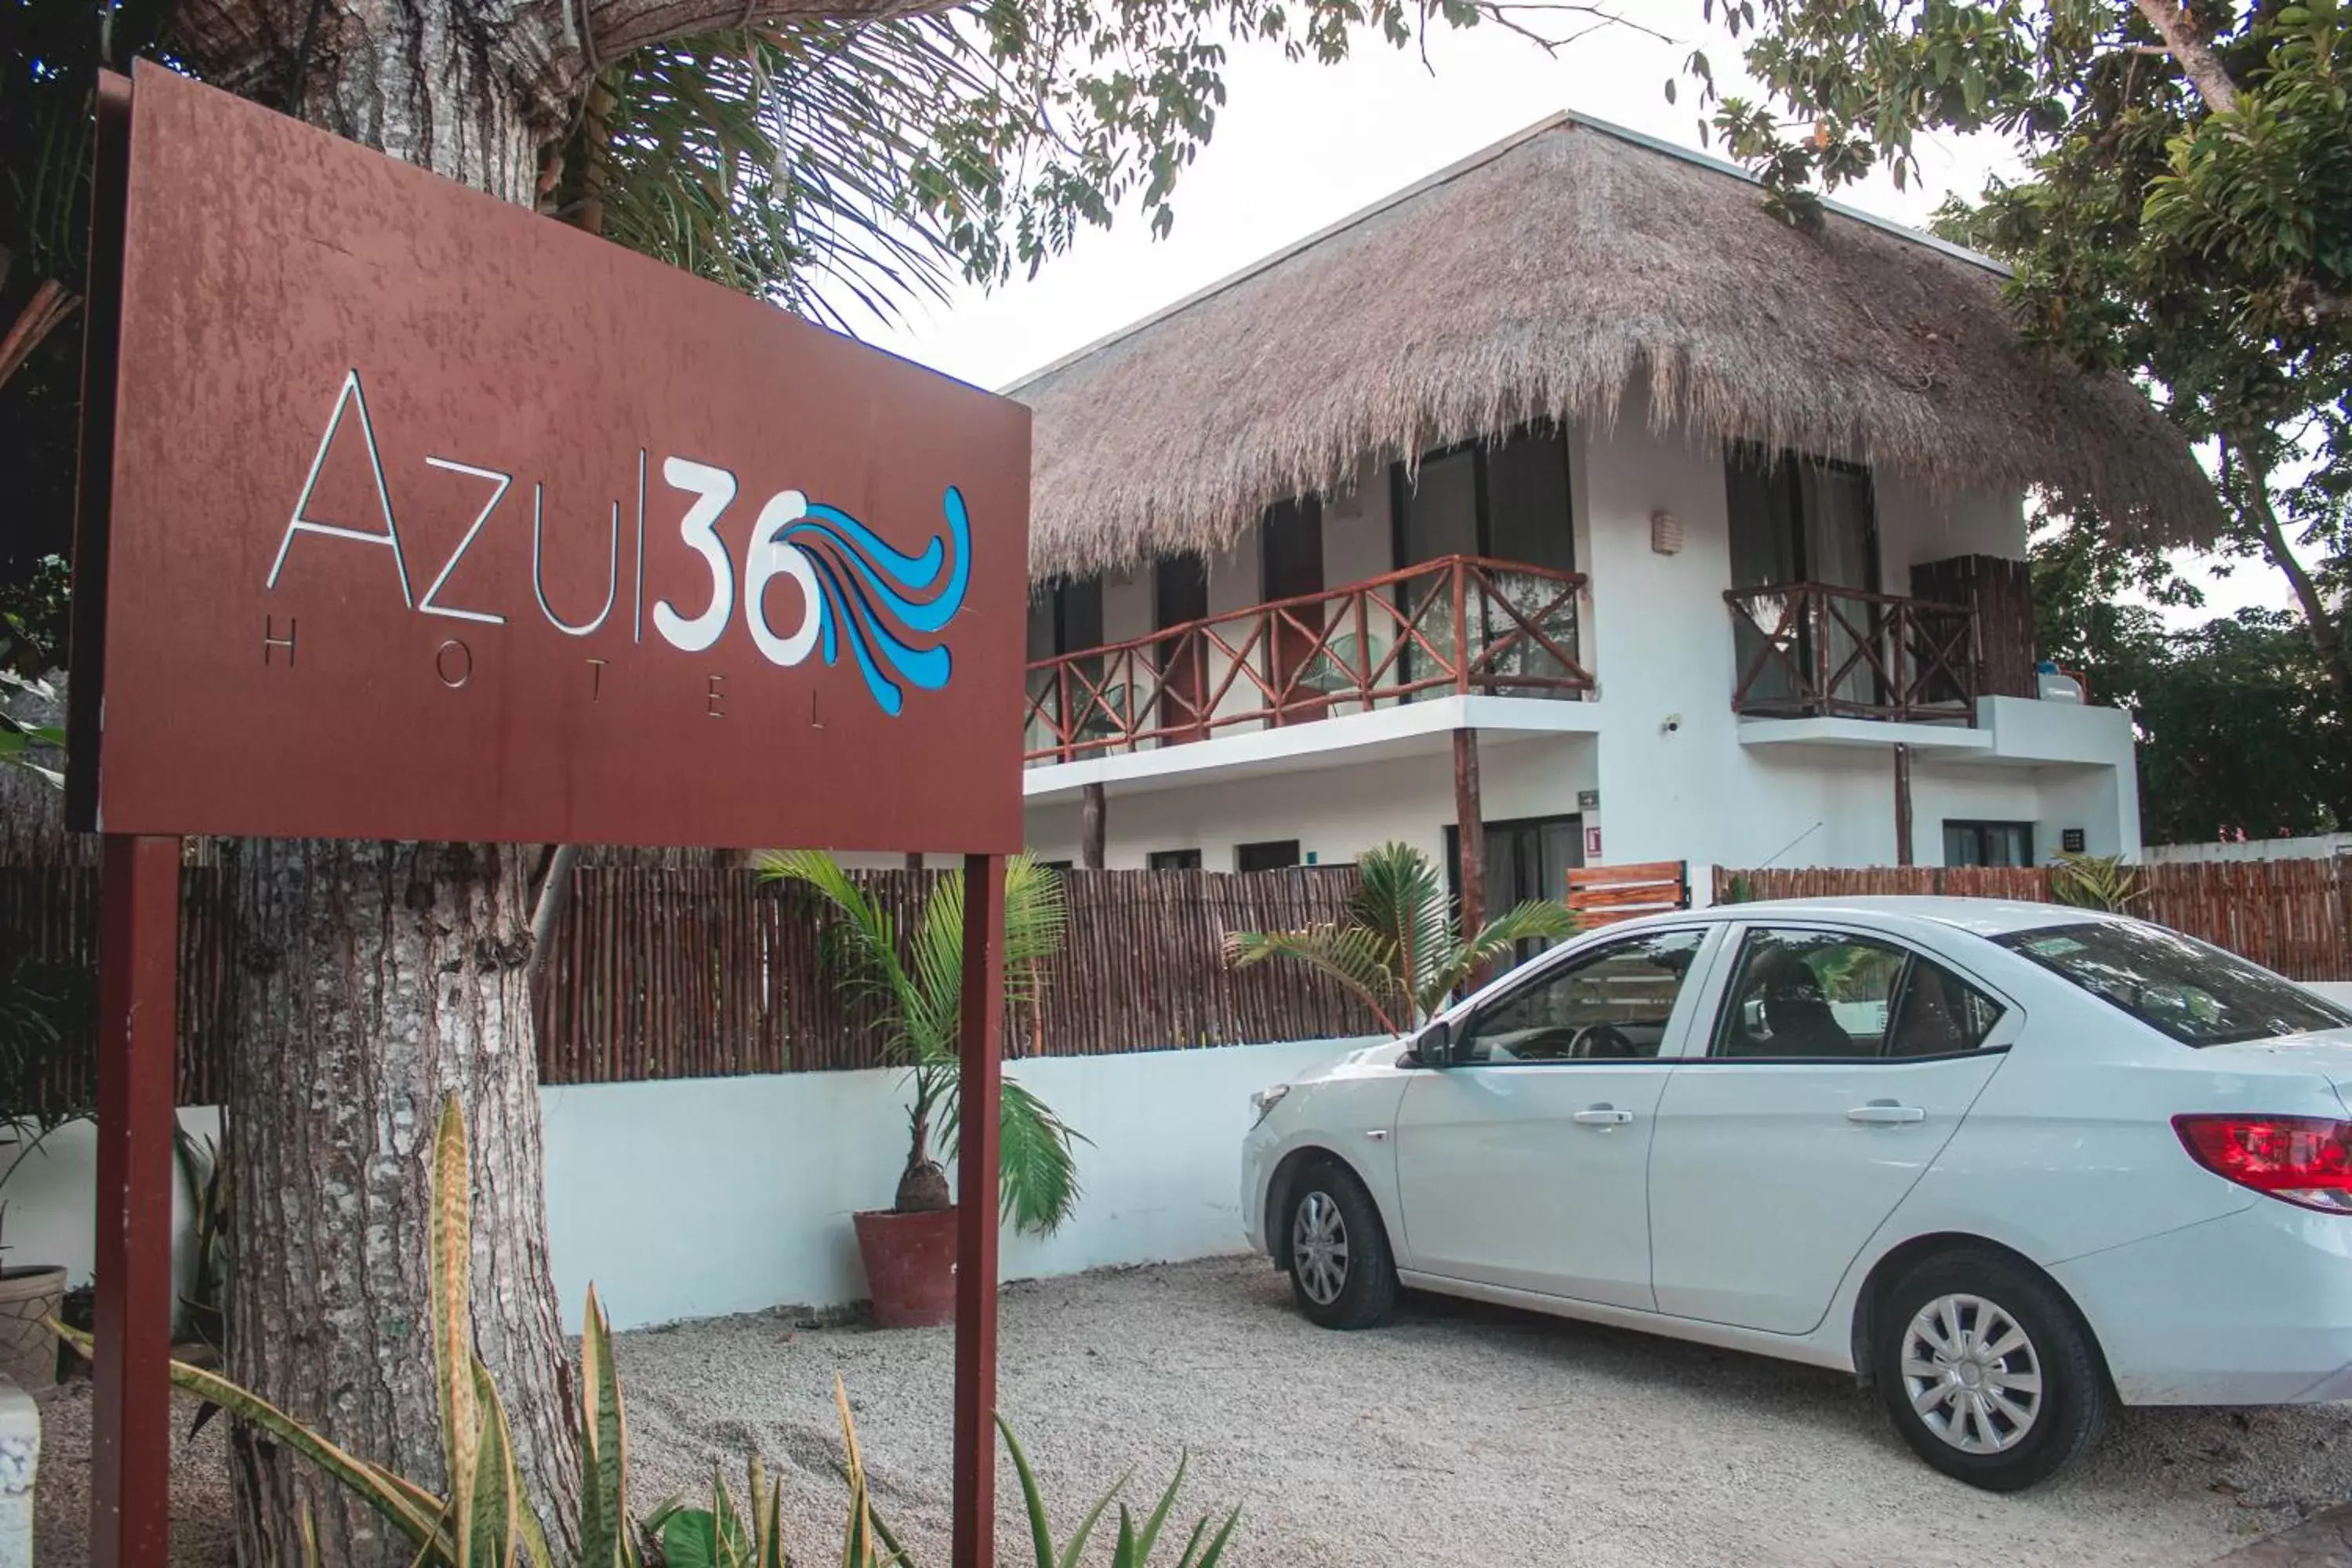 Parking, Property Building in Azul 36 Hotel